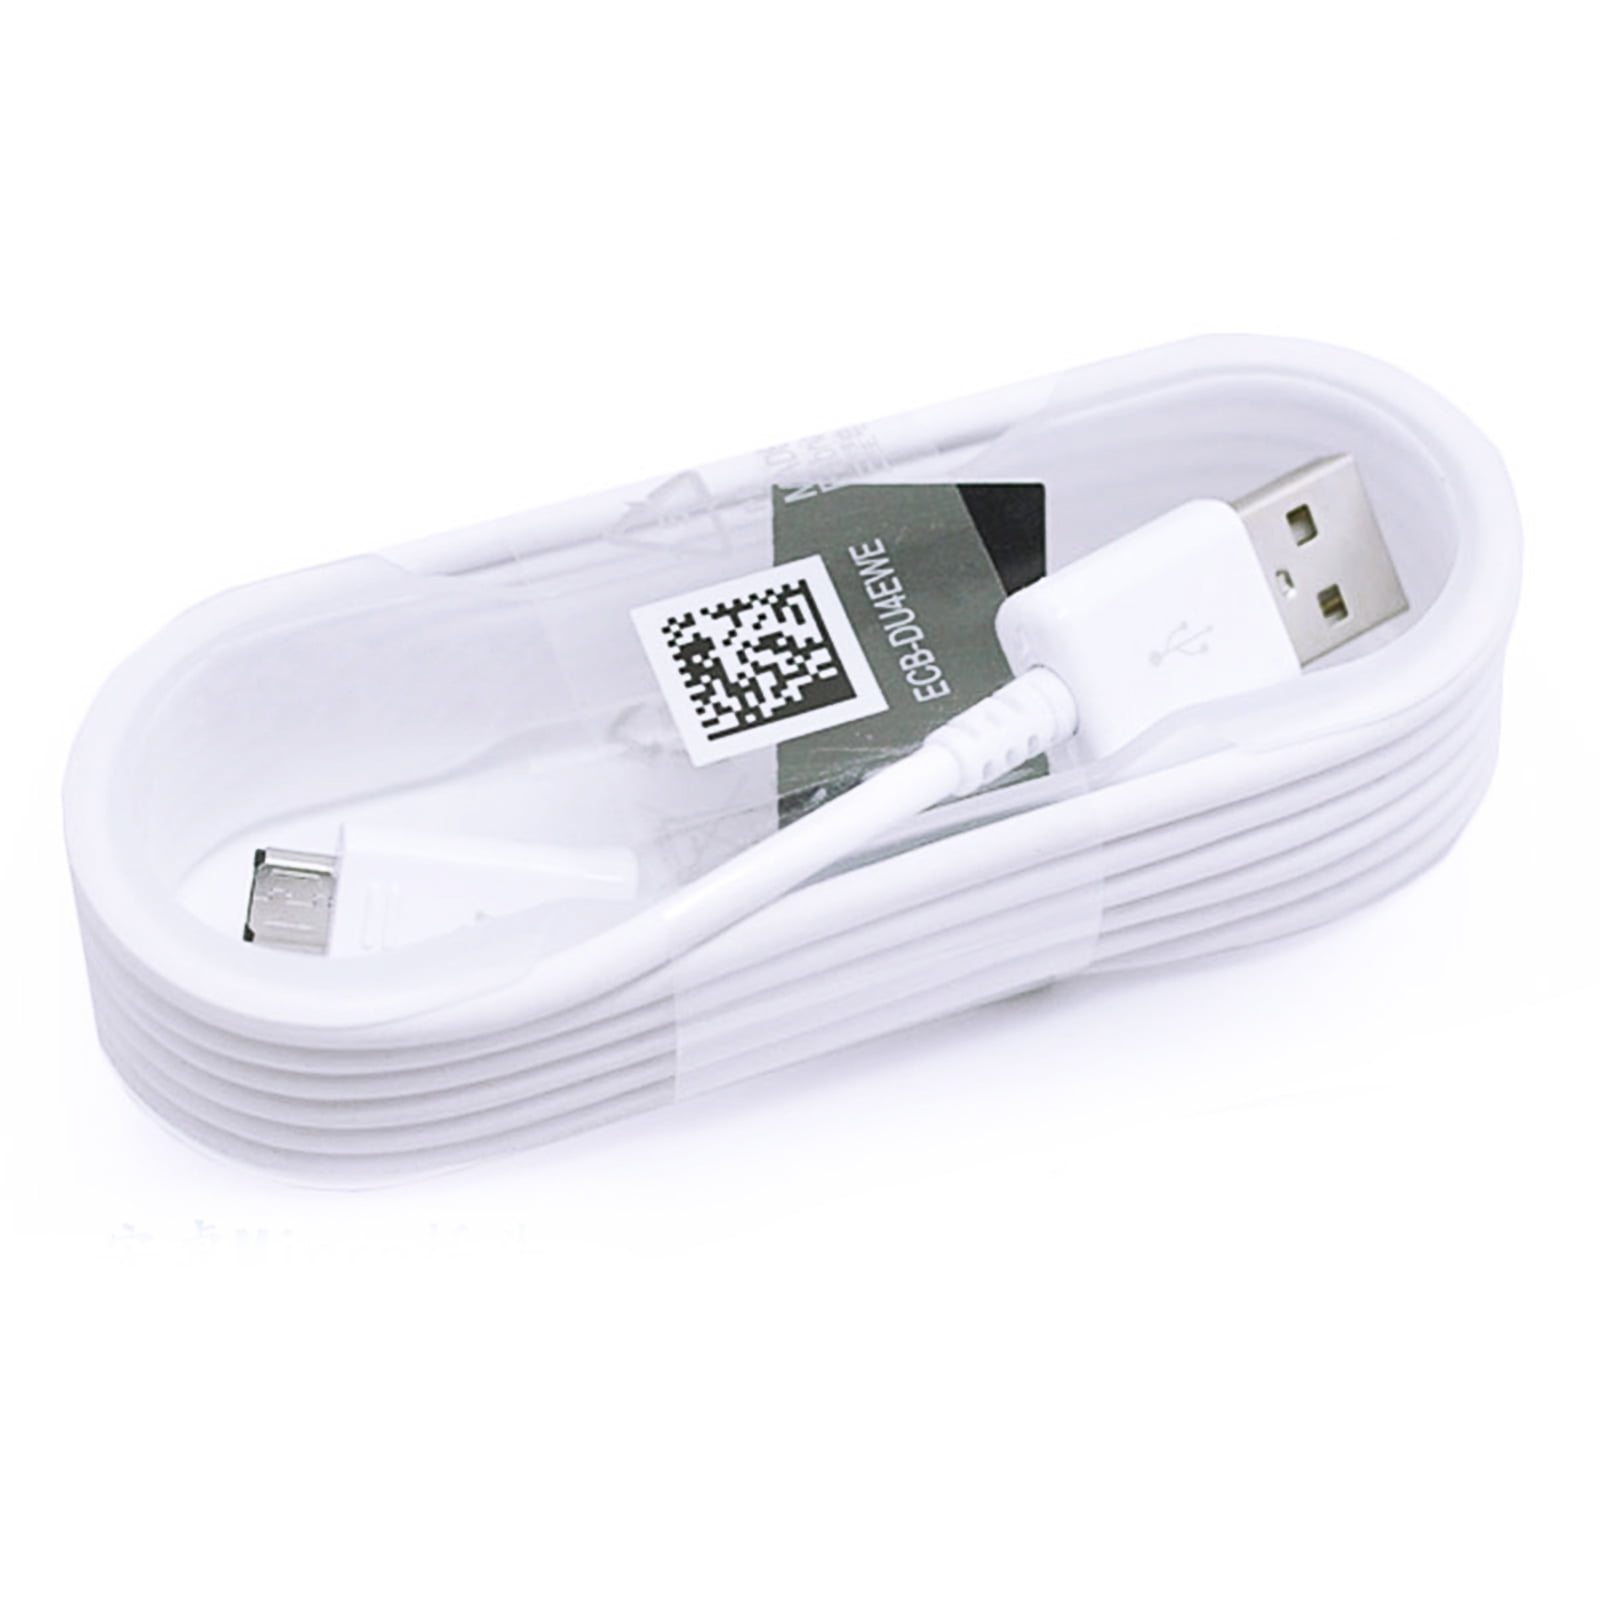 Original Samsung Micro USB Charger Data Cable For Samsung Glalxy Note 2 S3 S4 SP 